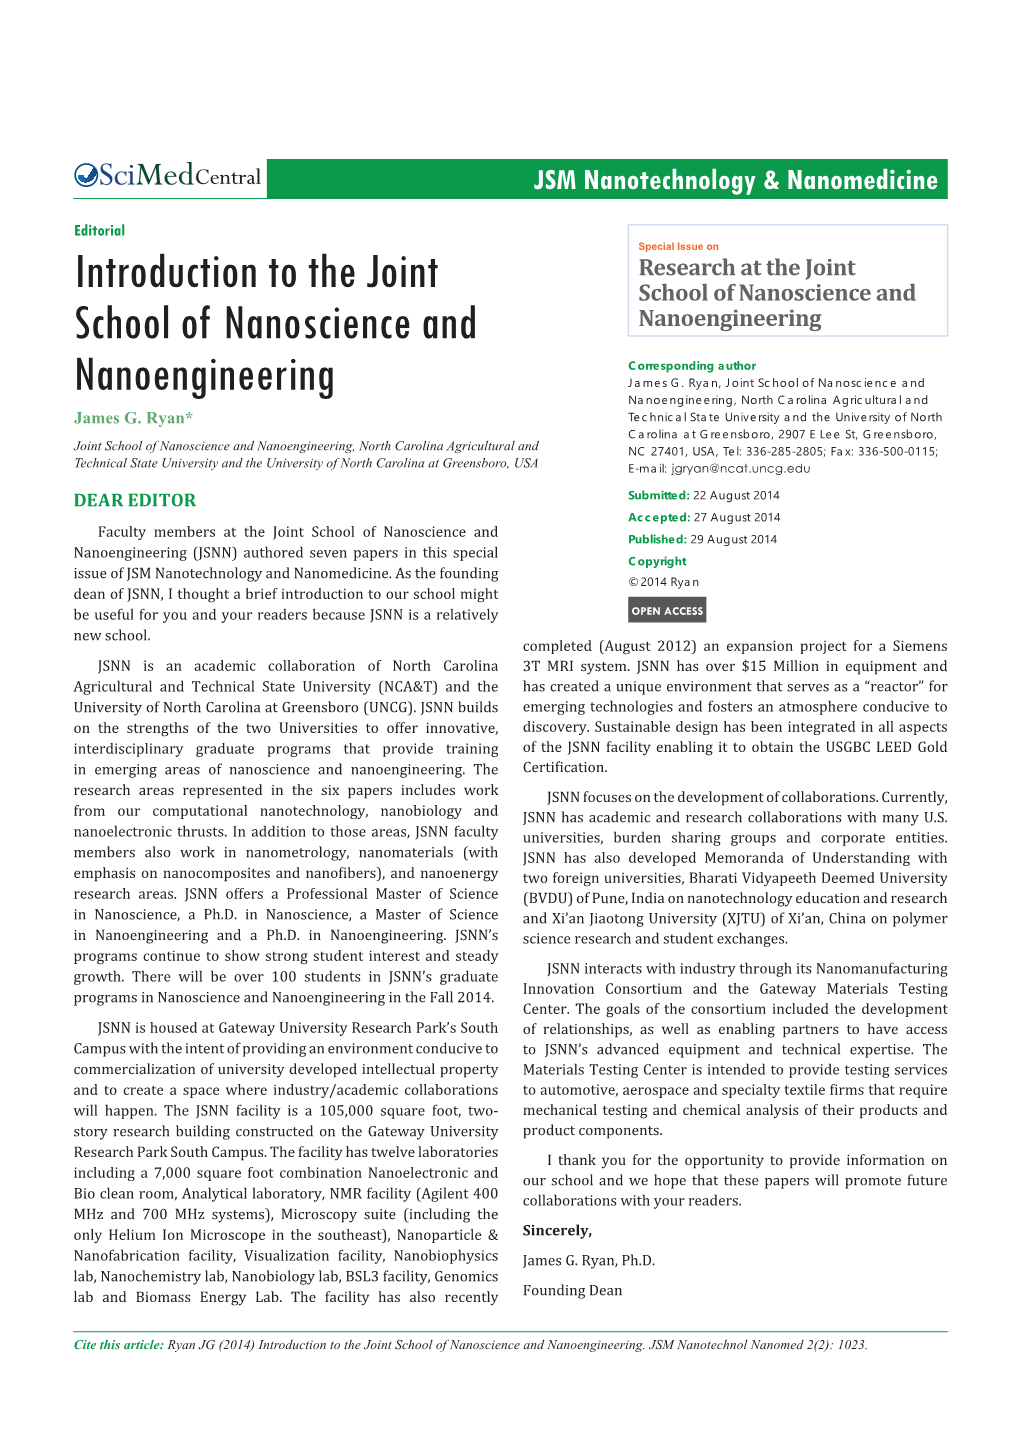 Introduction to the Joint School of Nanoscience and Nanoengineering